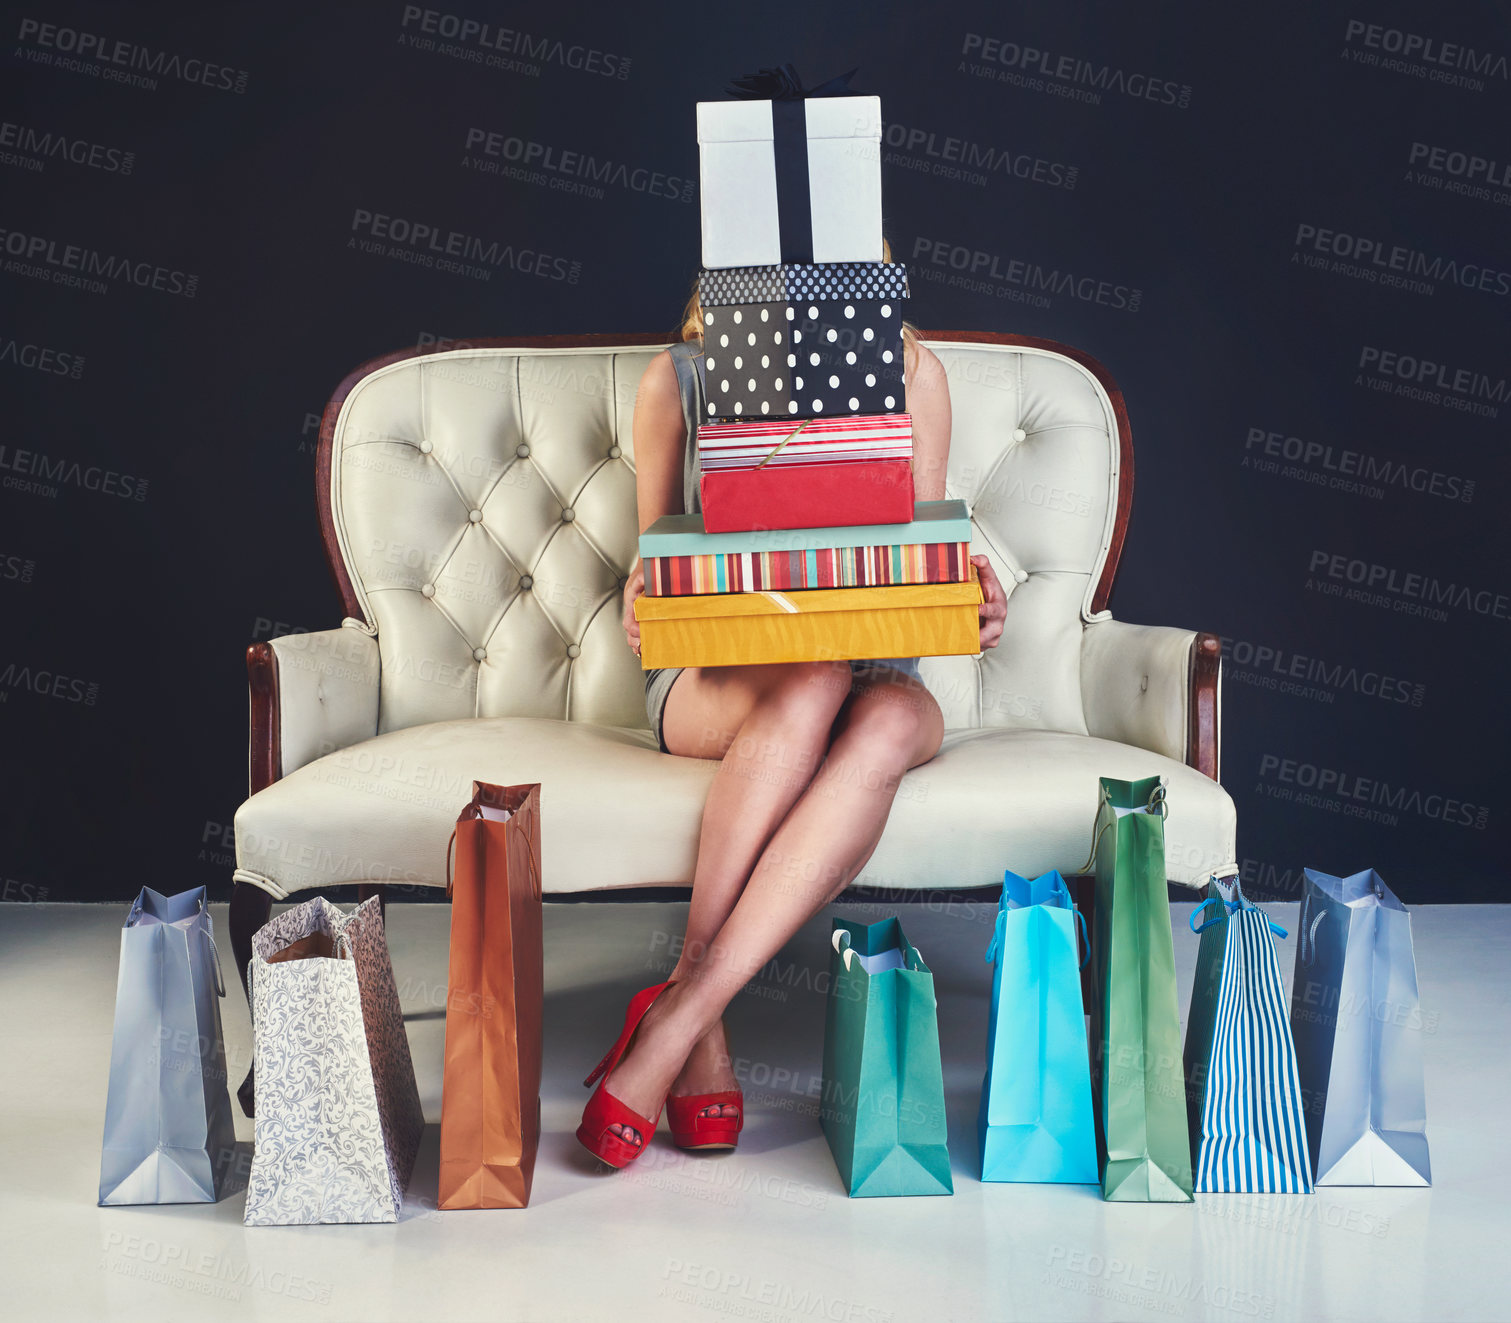 Buy stock photo Studio shot of a young woman sitting on a couch surrounded by gifts